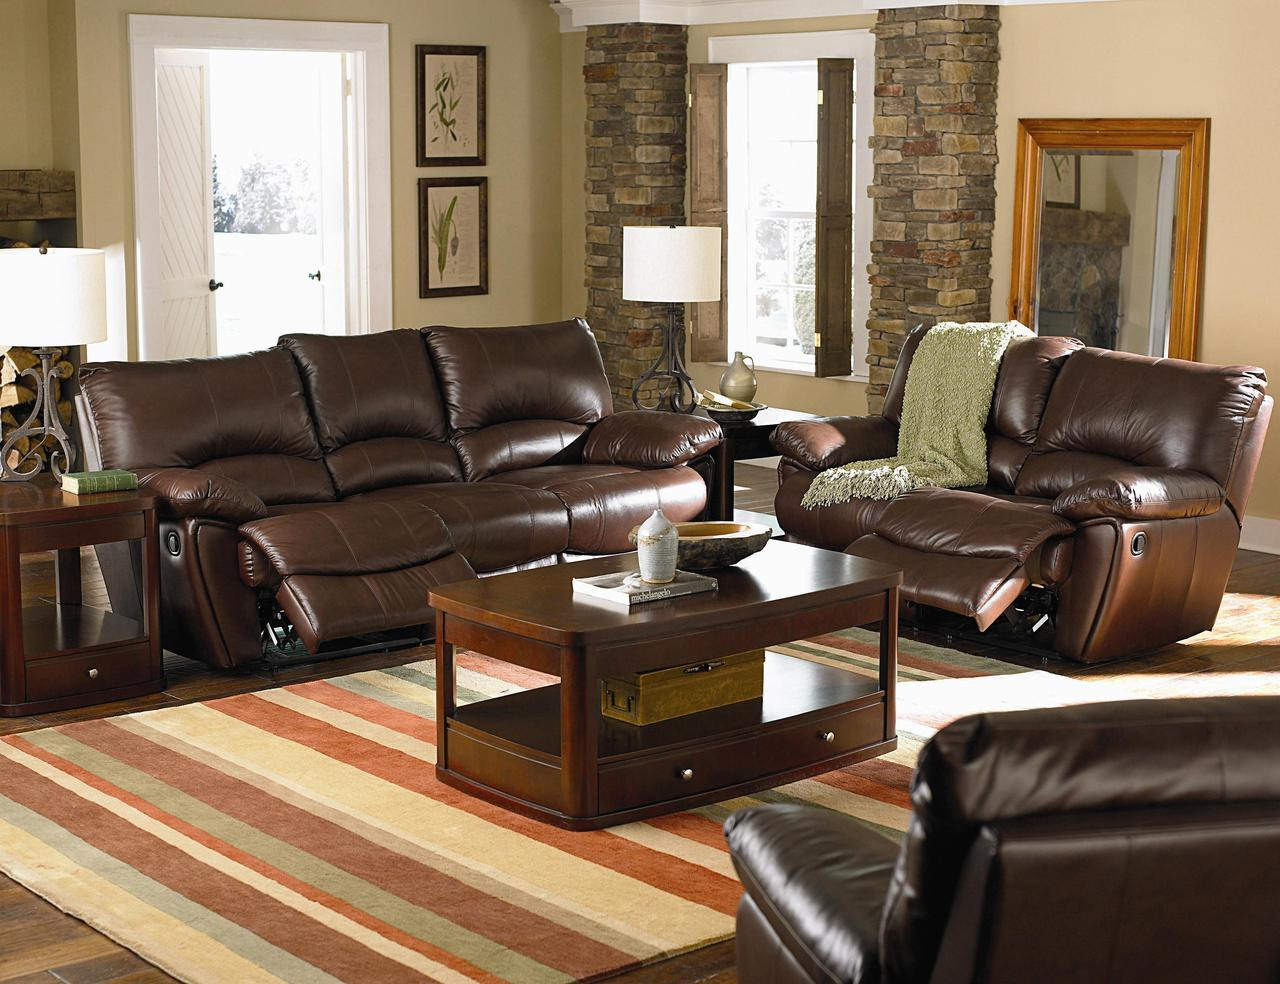 clifford brown leather double reclining sofa